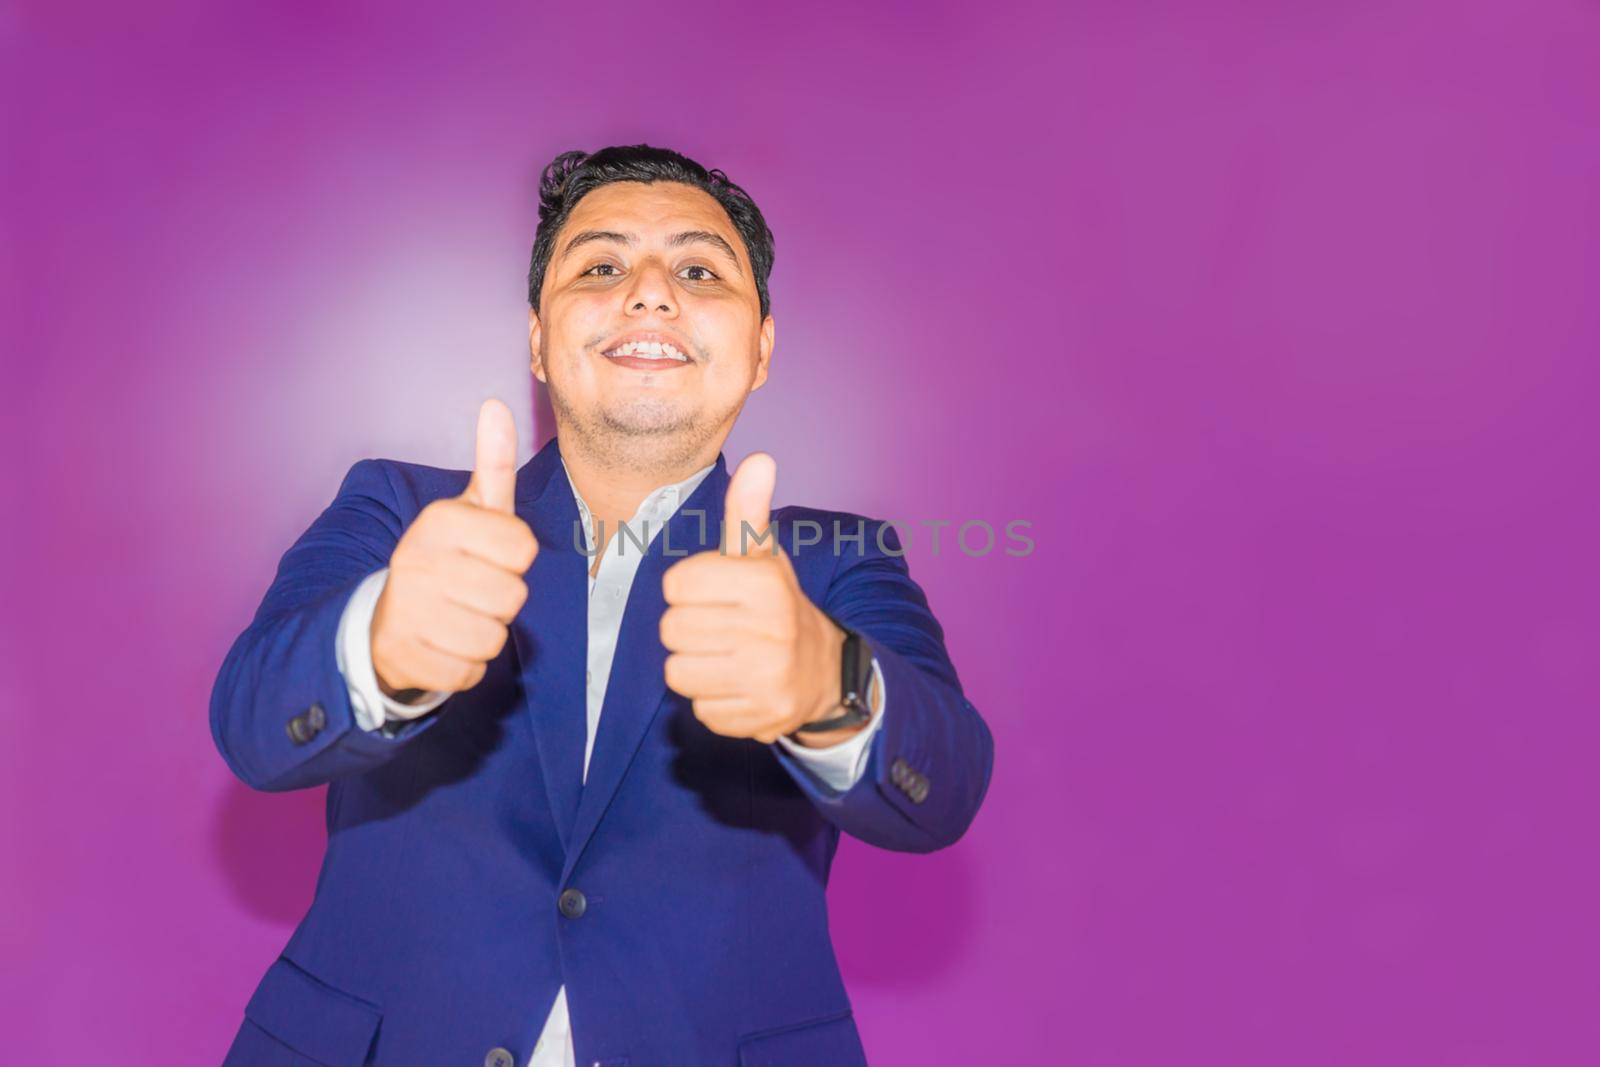 Isolated atin man from Nicaragua in a blue suit raising the thumbs of both hands on a plain purple background